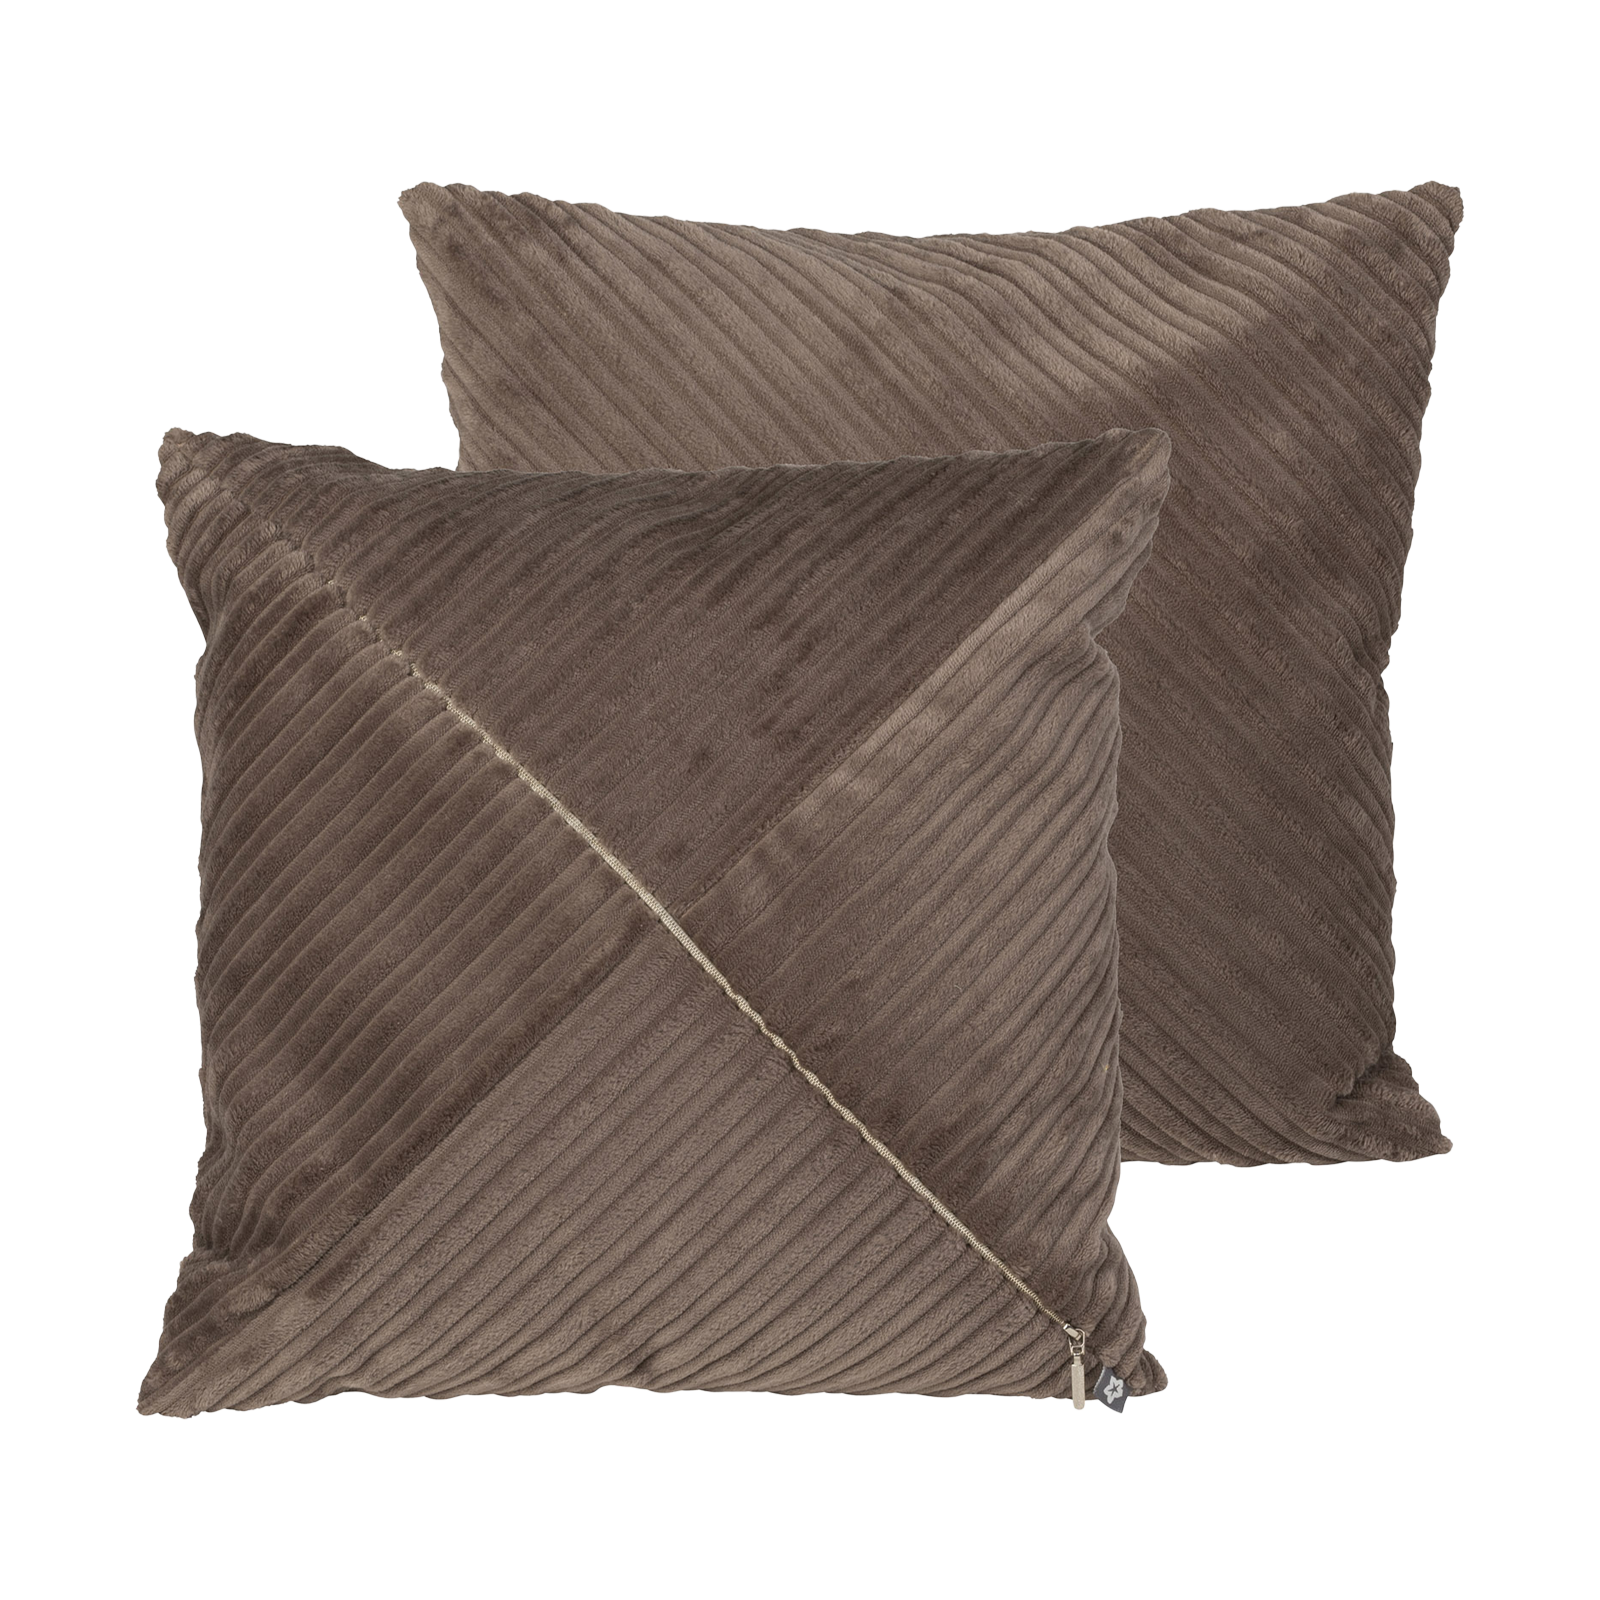 Größe: 40x 40 cm Farbe: taupe #farbe_taupe